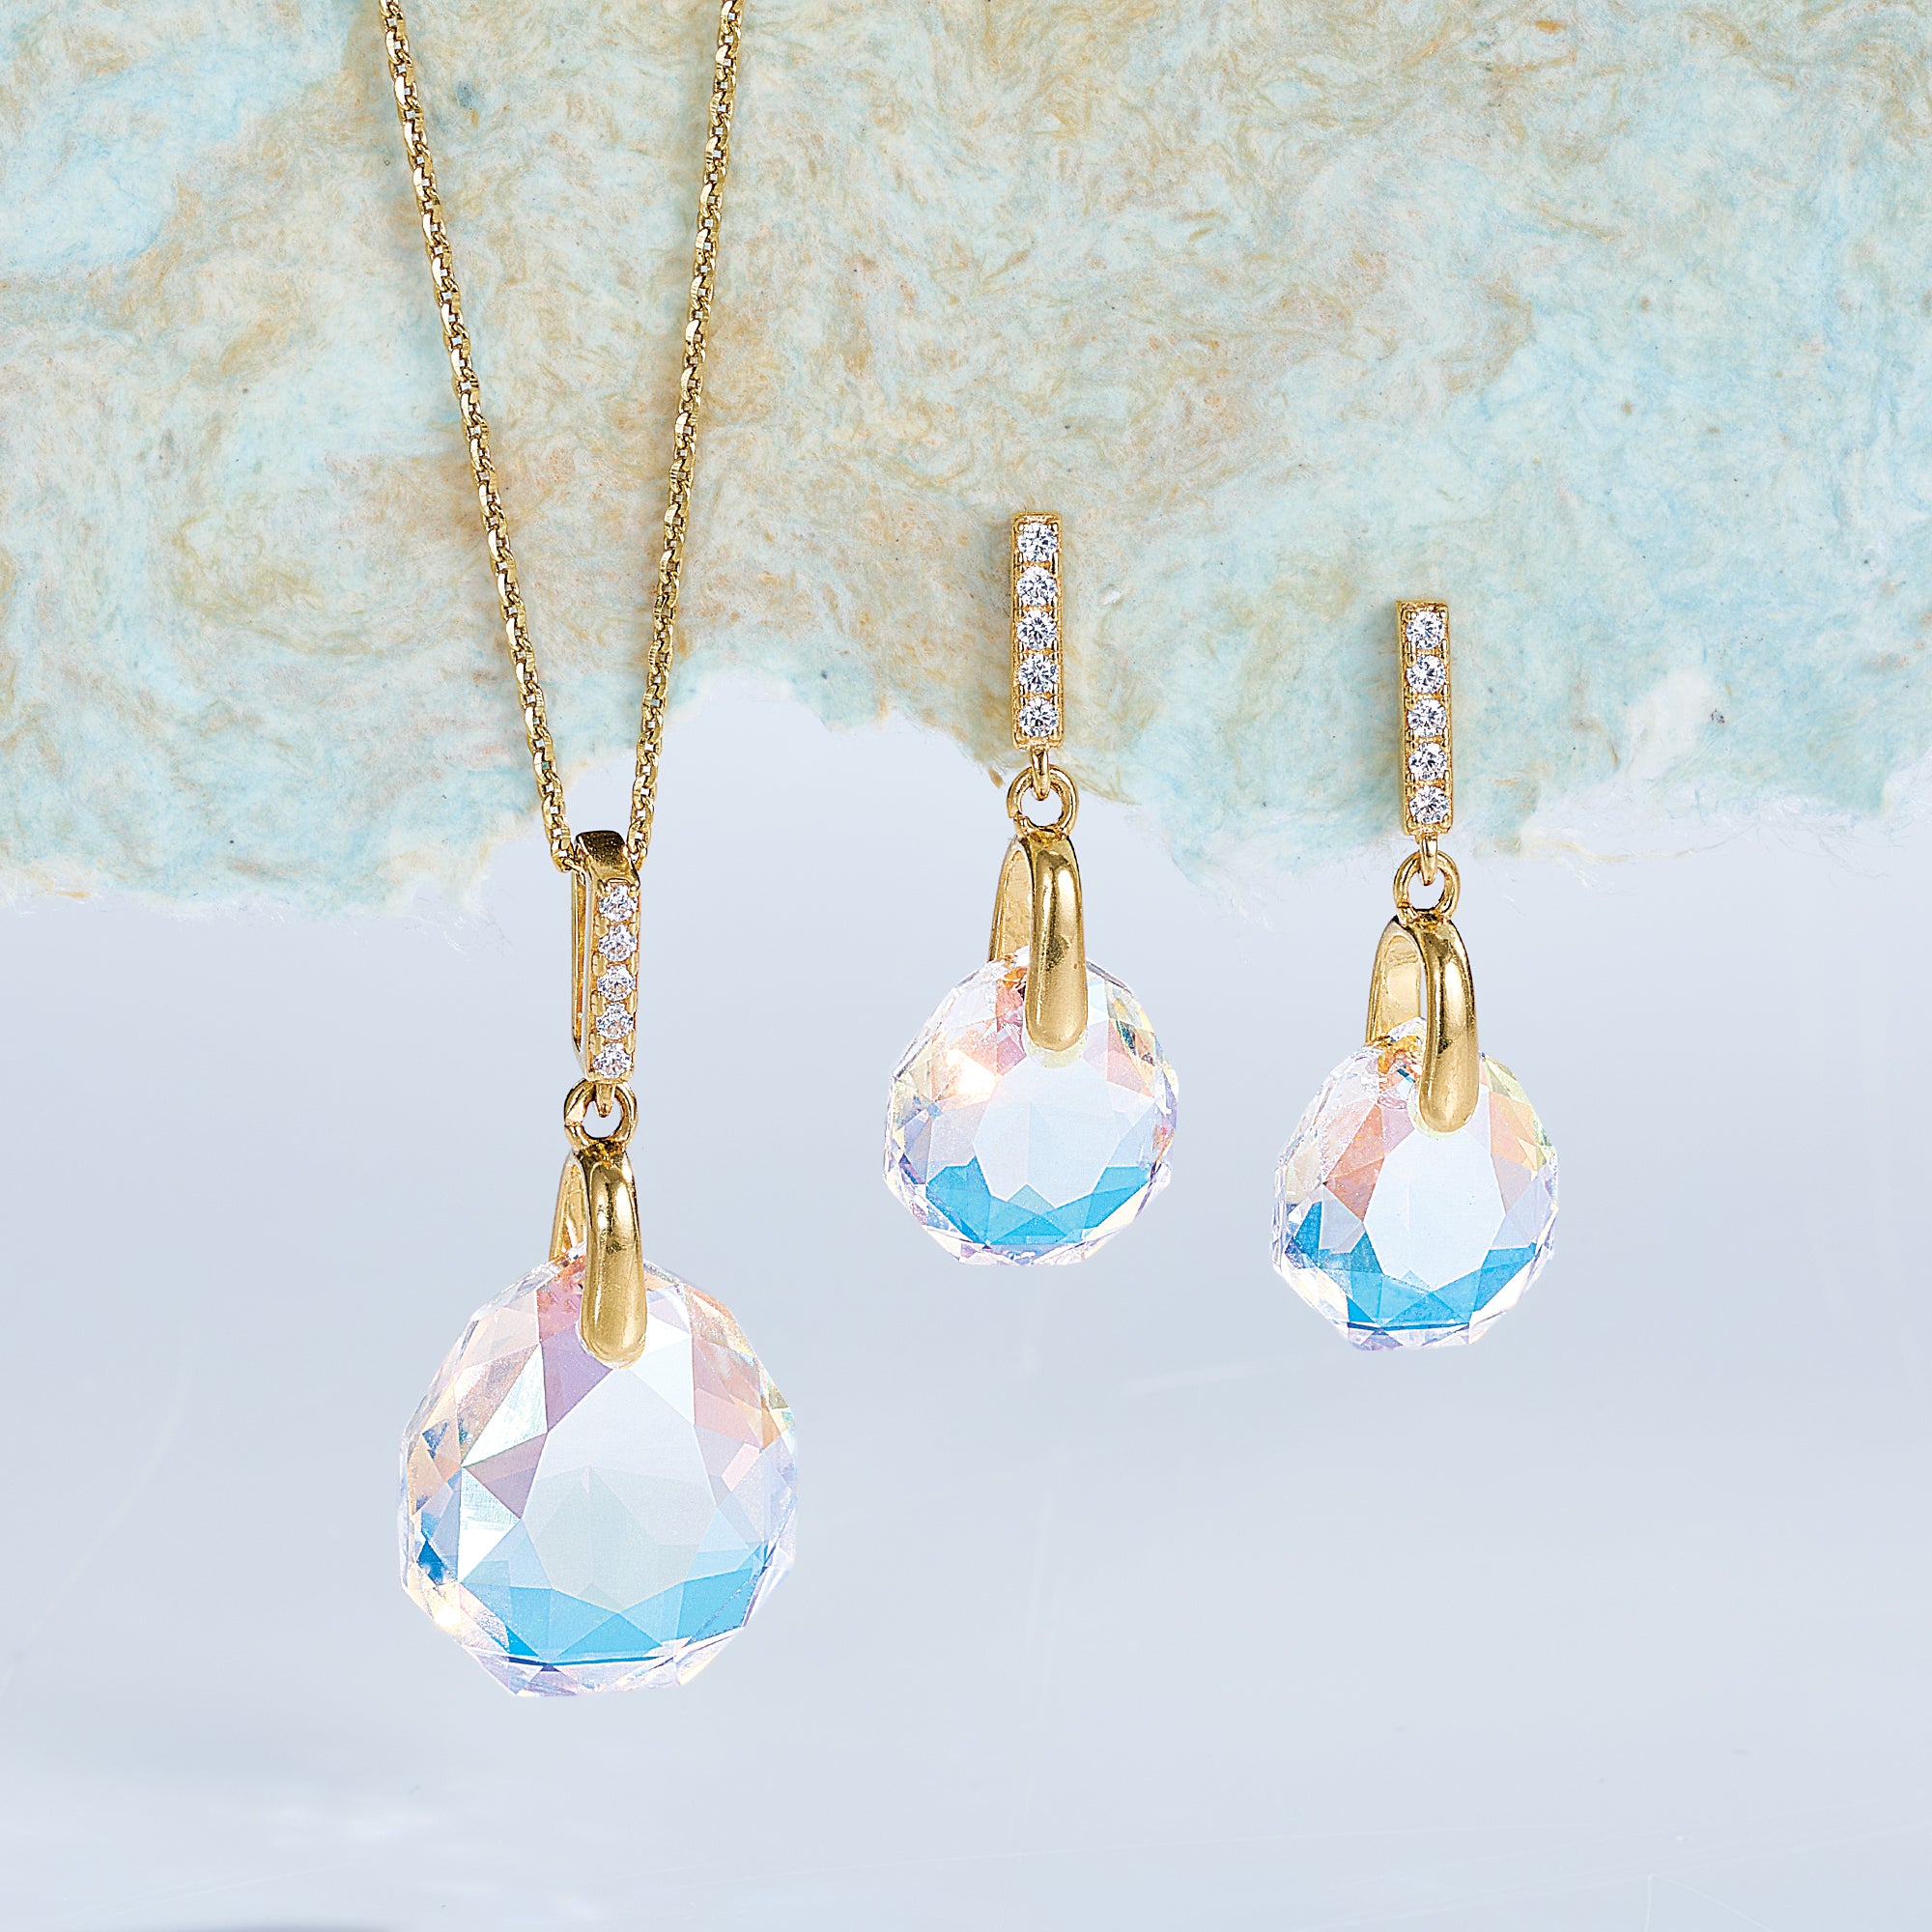 Iridescent Crystal Raindrop Necklace & Earrings Set